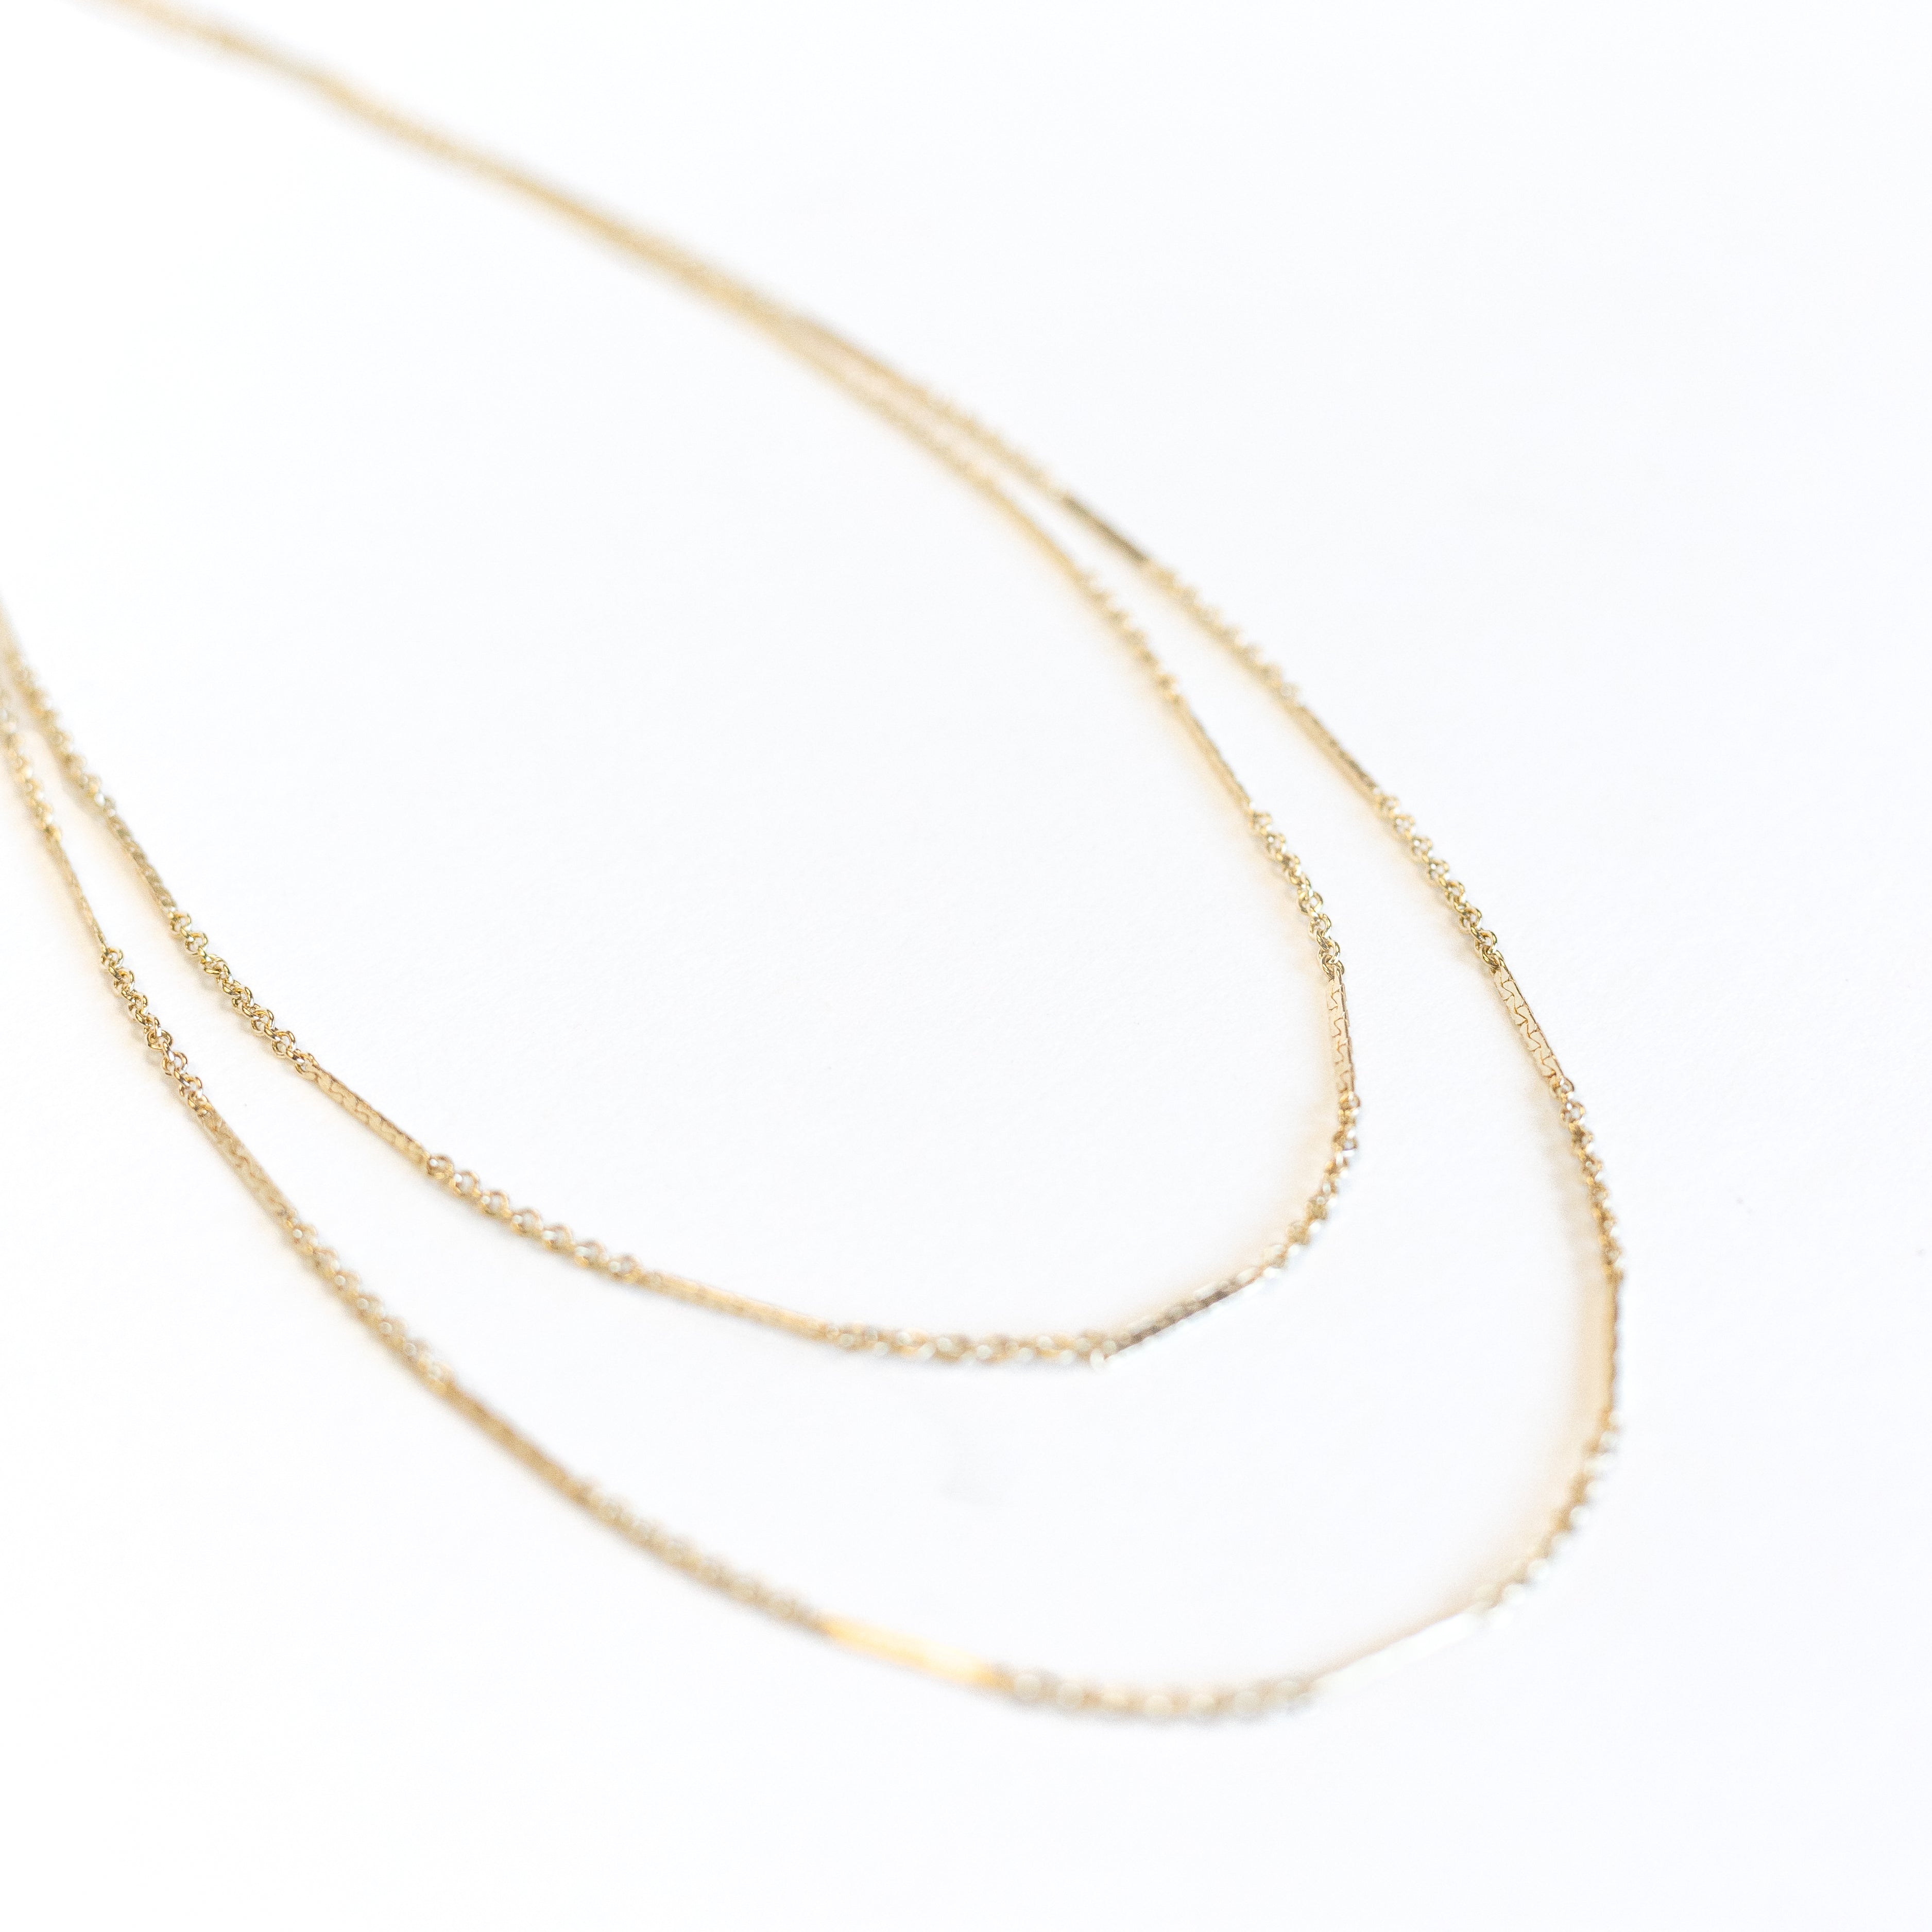 Dainty gold thin necklace that wraps around your neck two times